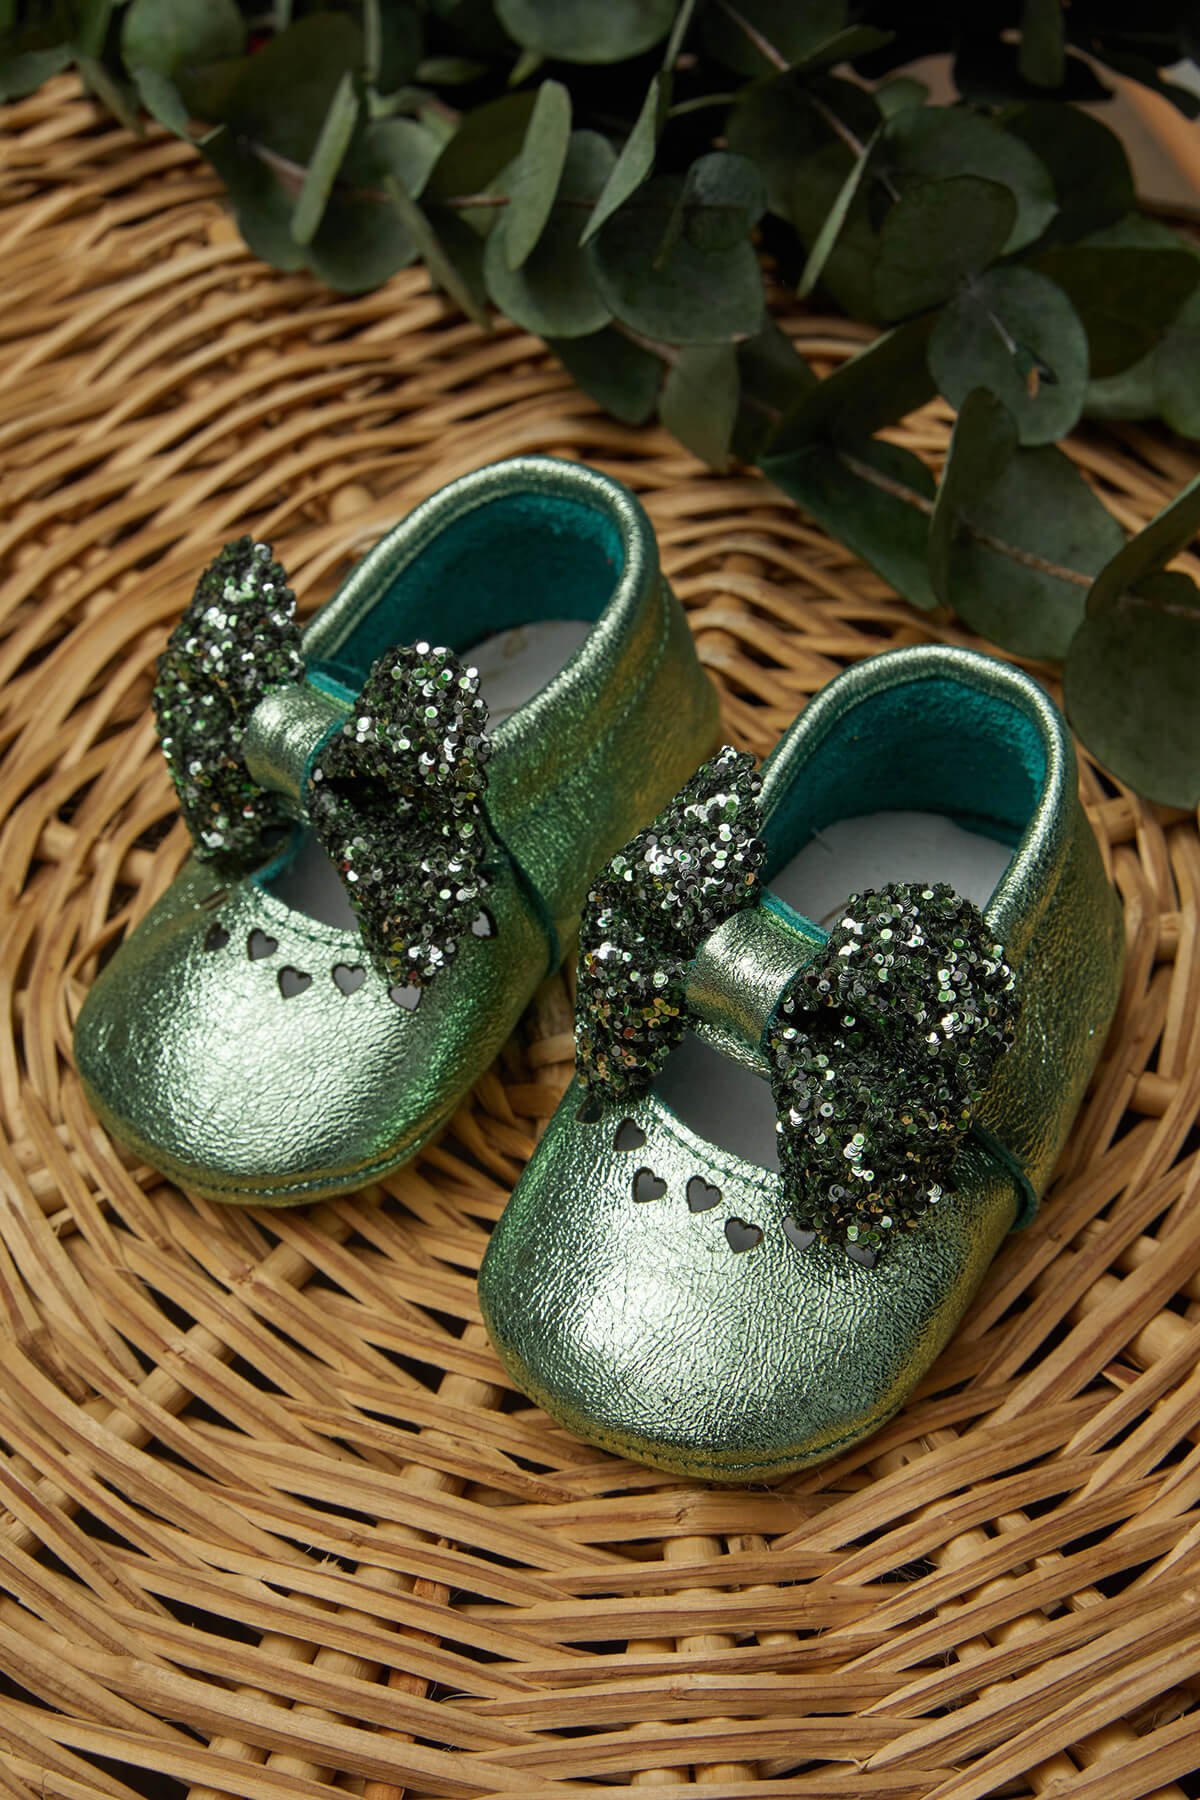 Heart Genuine Leather Baby Shoes Green Ribbon